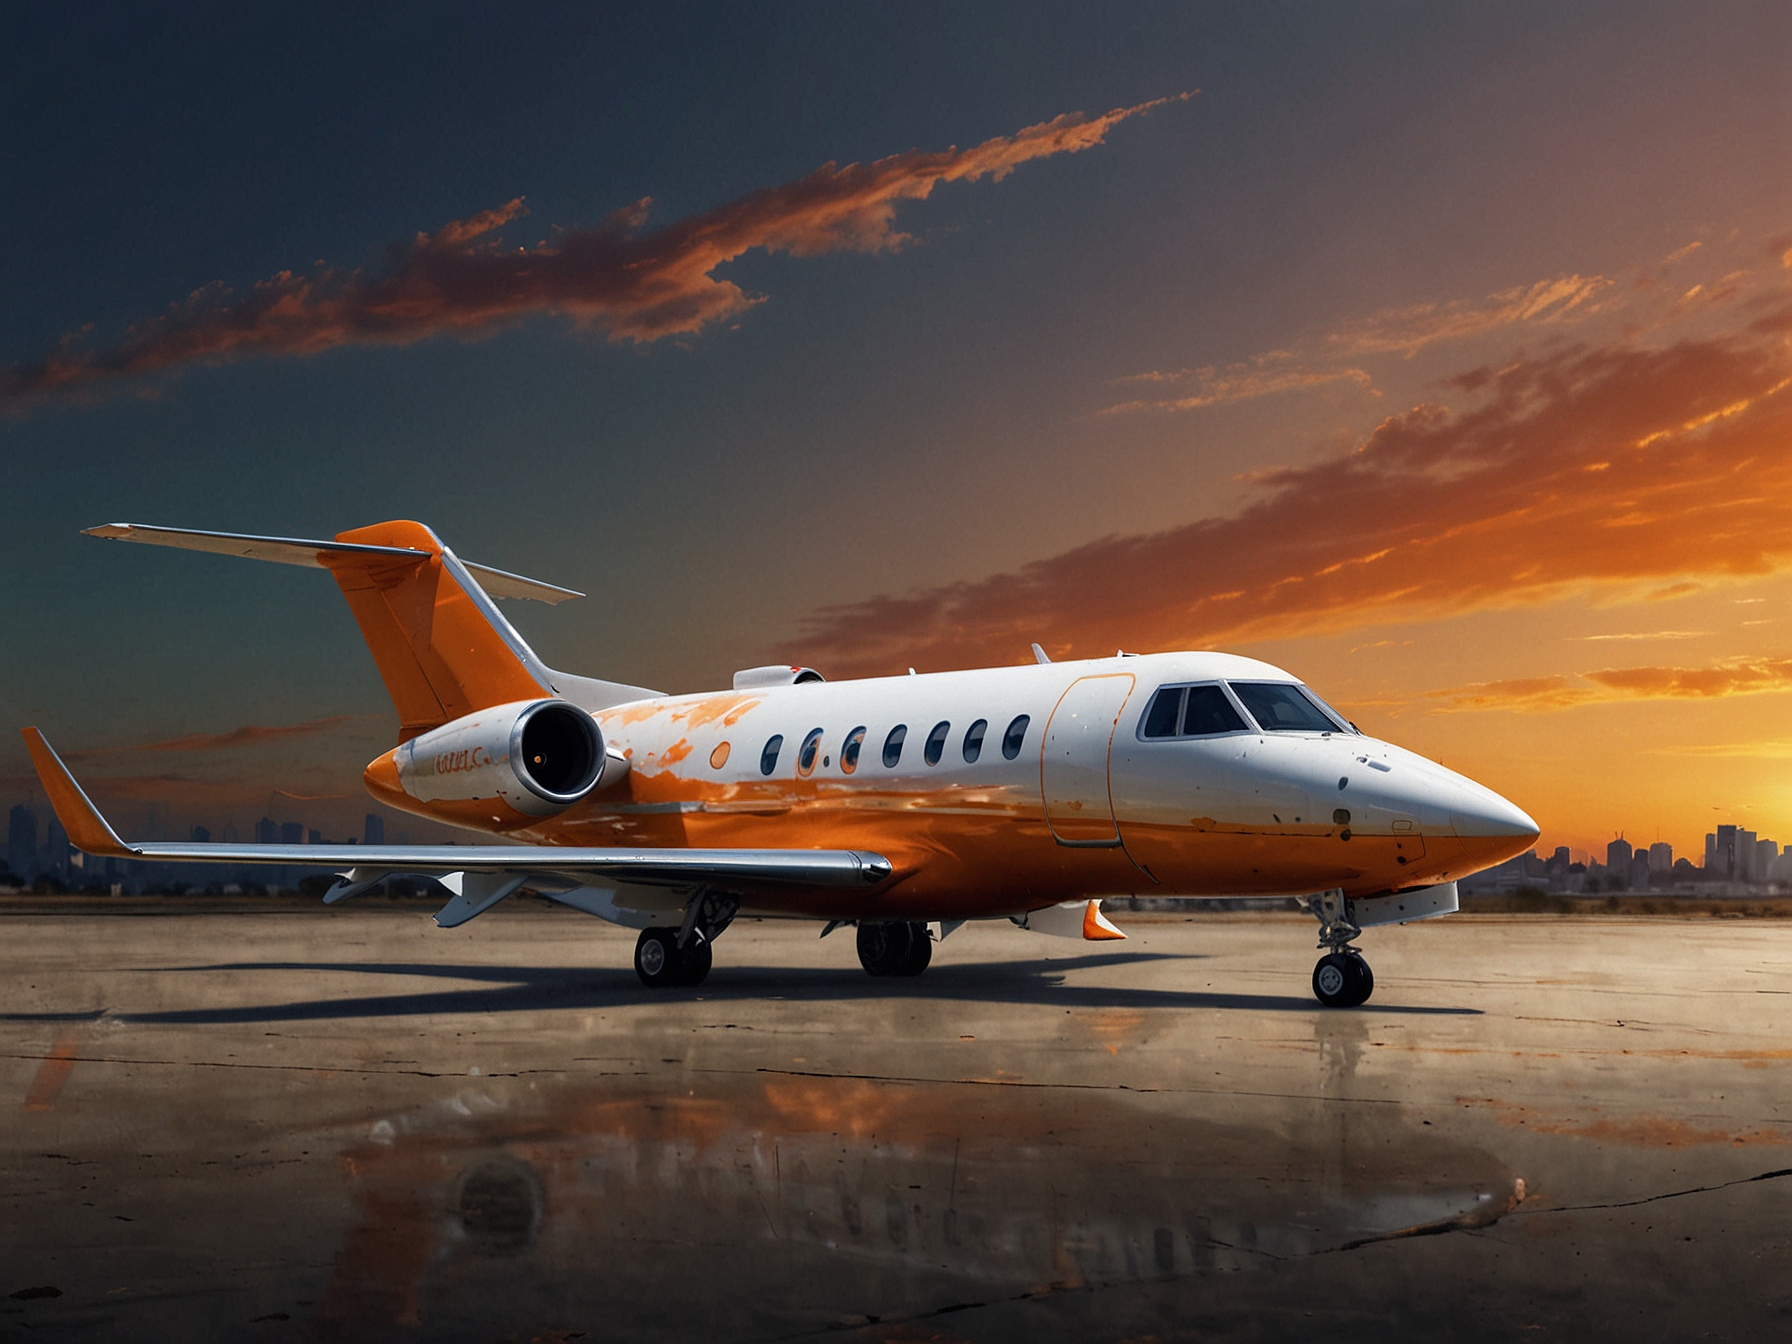 A series of private jets with their exteriors defaced by orange paint, capturing the vivid scene that drew public attention and debate on social media about climate responsibility.